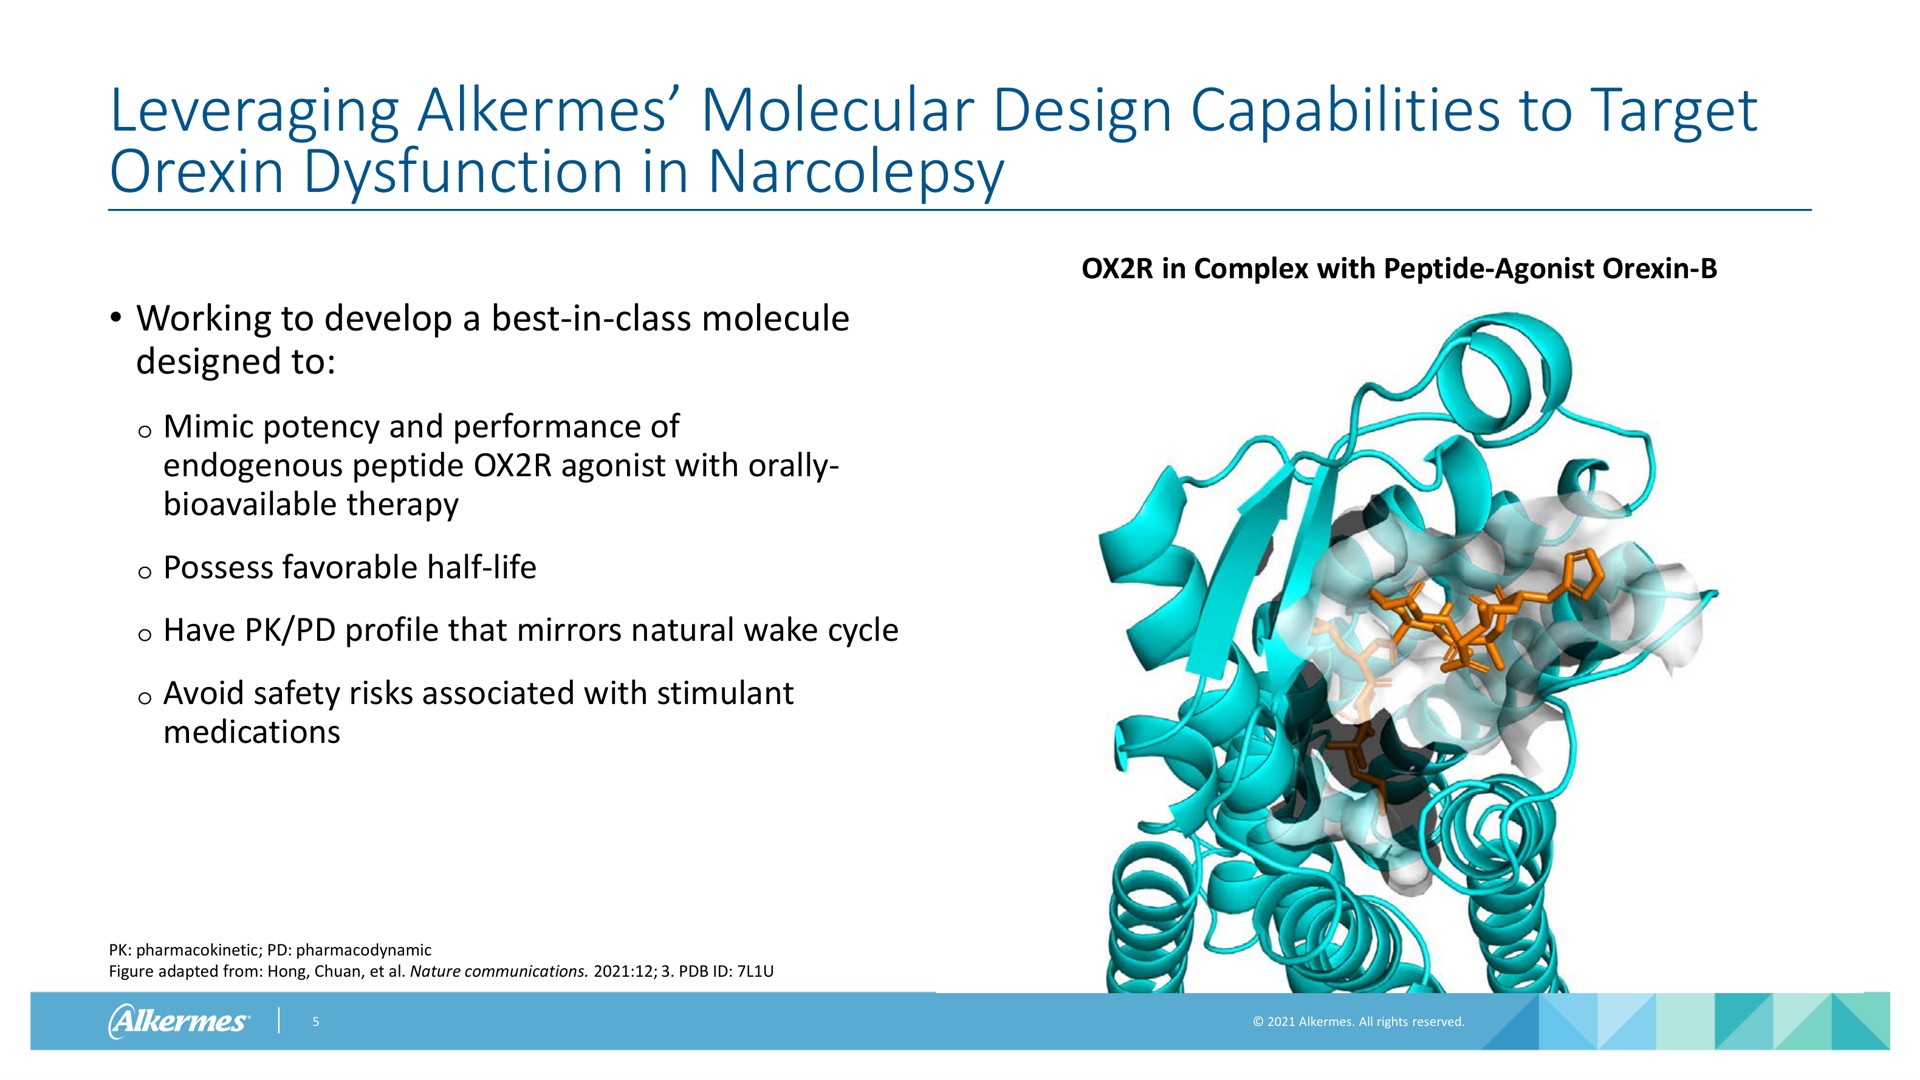 leveraging alkermes molecular design capabilities to target dysfunction in narcolepsy in complex with peptide agonist working to develop a best in class molecule designed to mimic potency and performance of endogenous peptide agonist with orally therapy possess favorable half life have profile that mirrors natural wake cycle avoid safety risks associated with stimulant medications pharmacodynamic figure adapted from hong nature communications | Alkermes